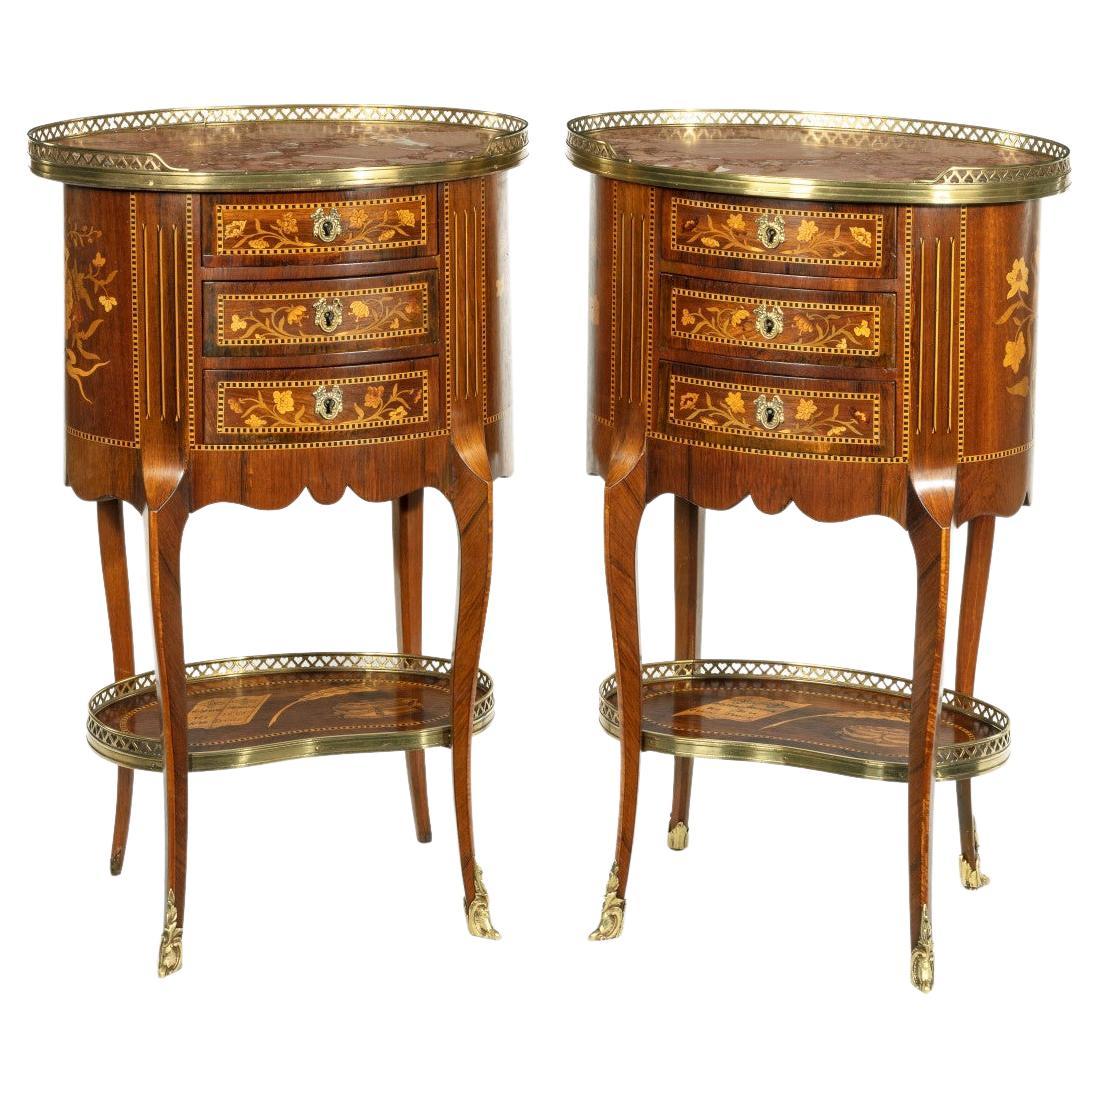 Pair of French Rosewood Oval Marquetry Bedside Tables with Marble Tops